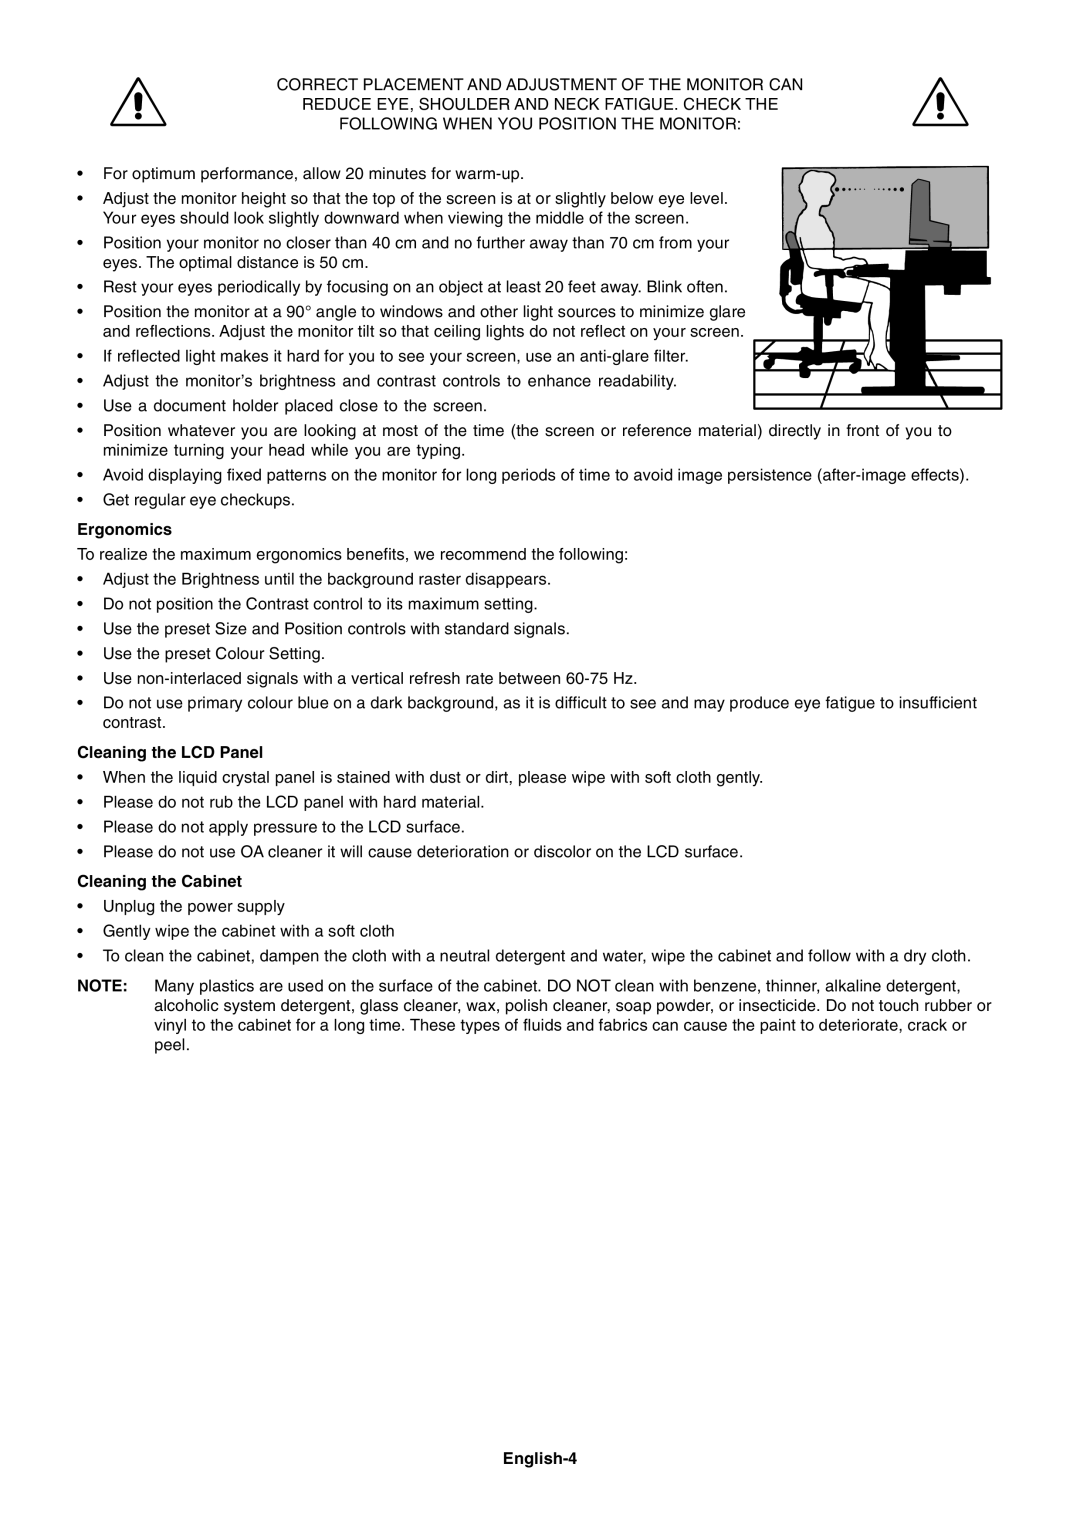 NEC L227HR user manual Ergonomics, Cleaning the LCD Panel, Cleaning the Cabinet, English-4 